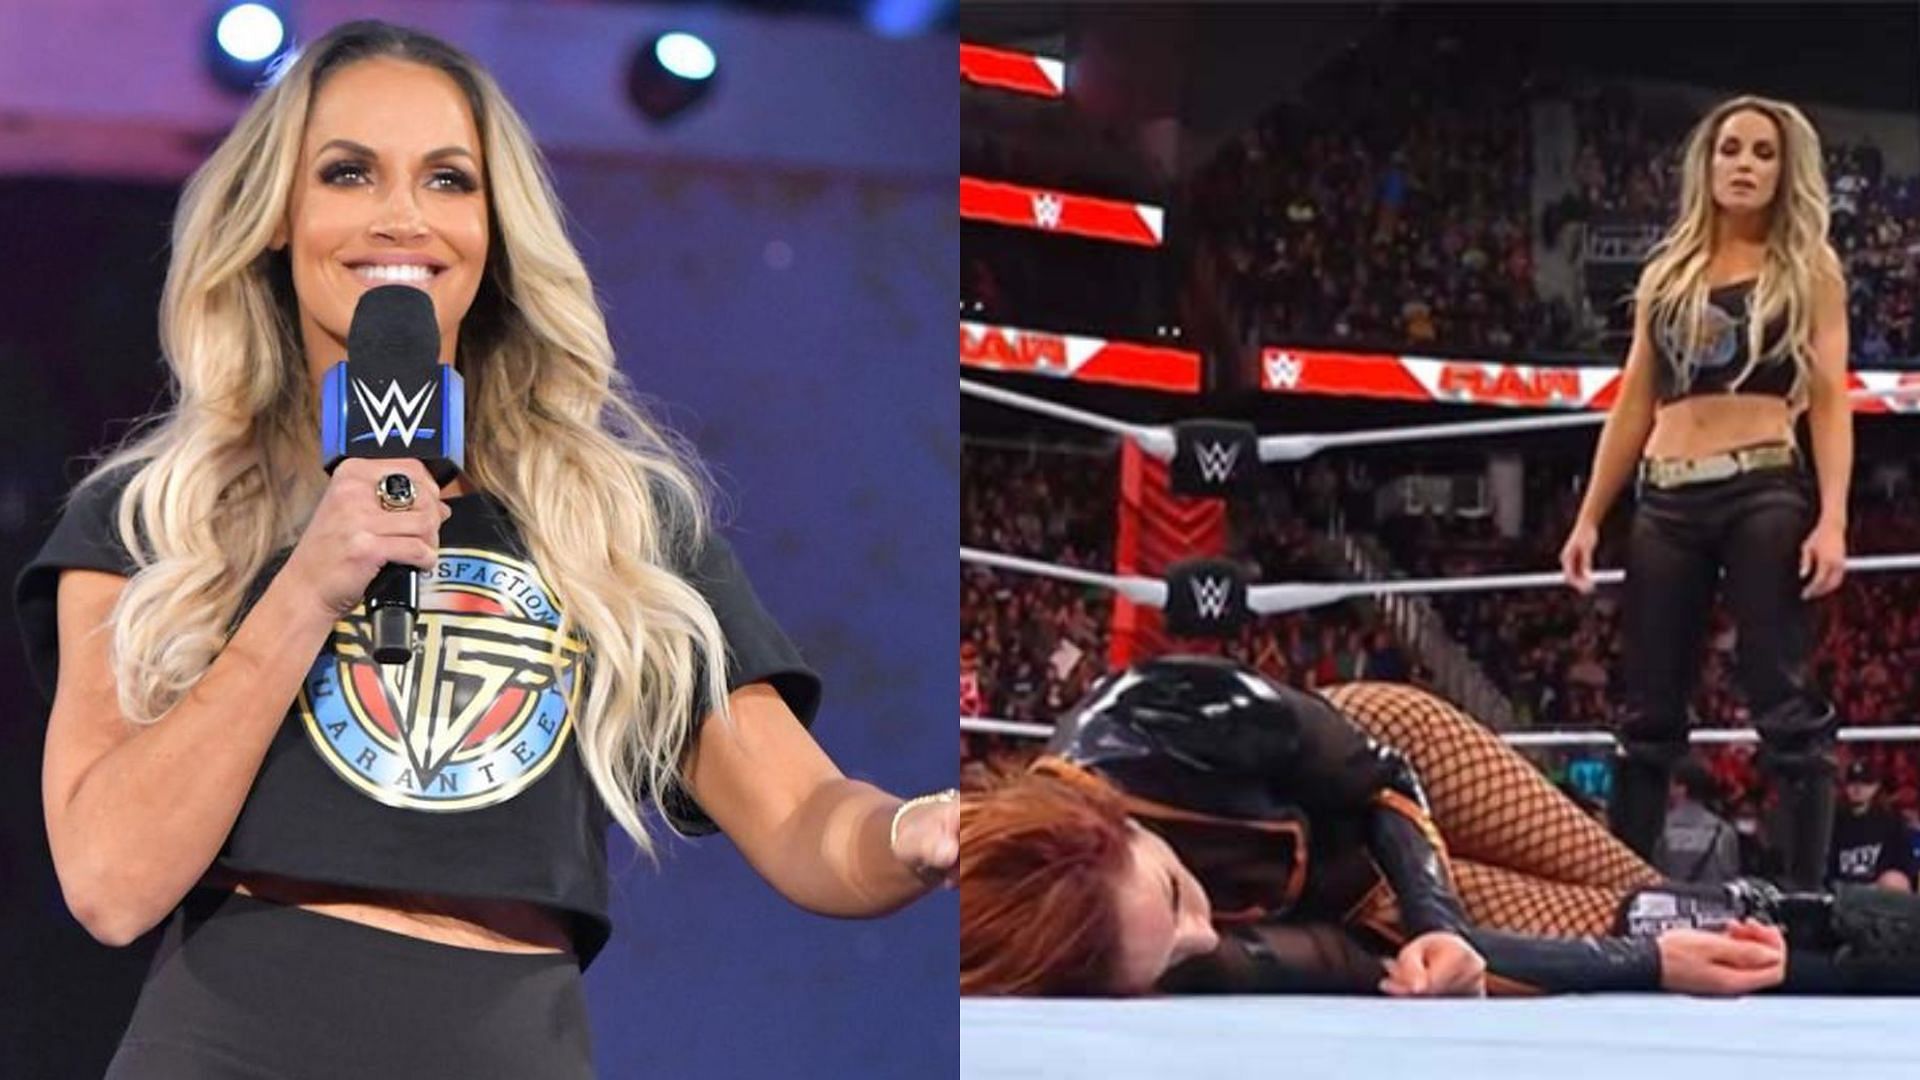 Trish Stratus turned heel by attacking Becky Lynch